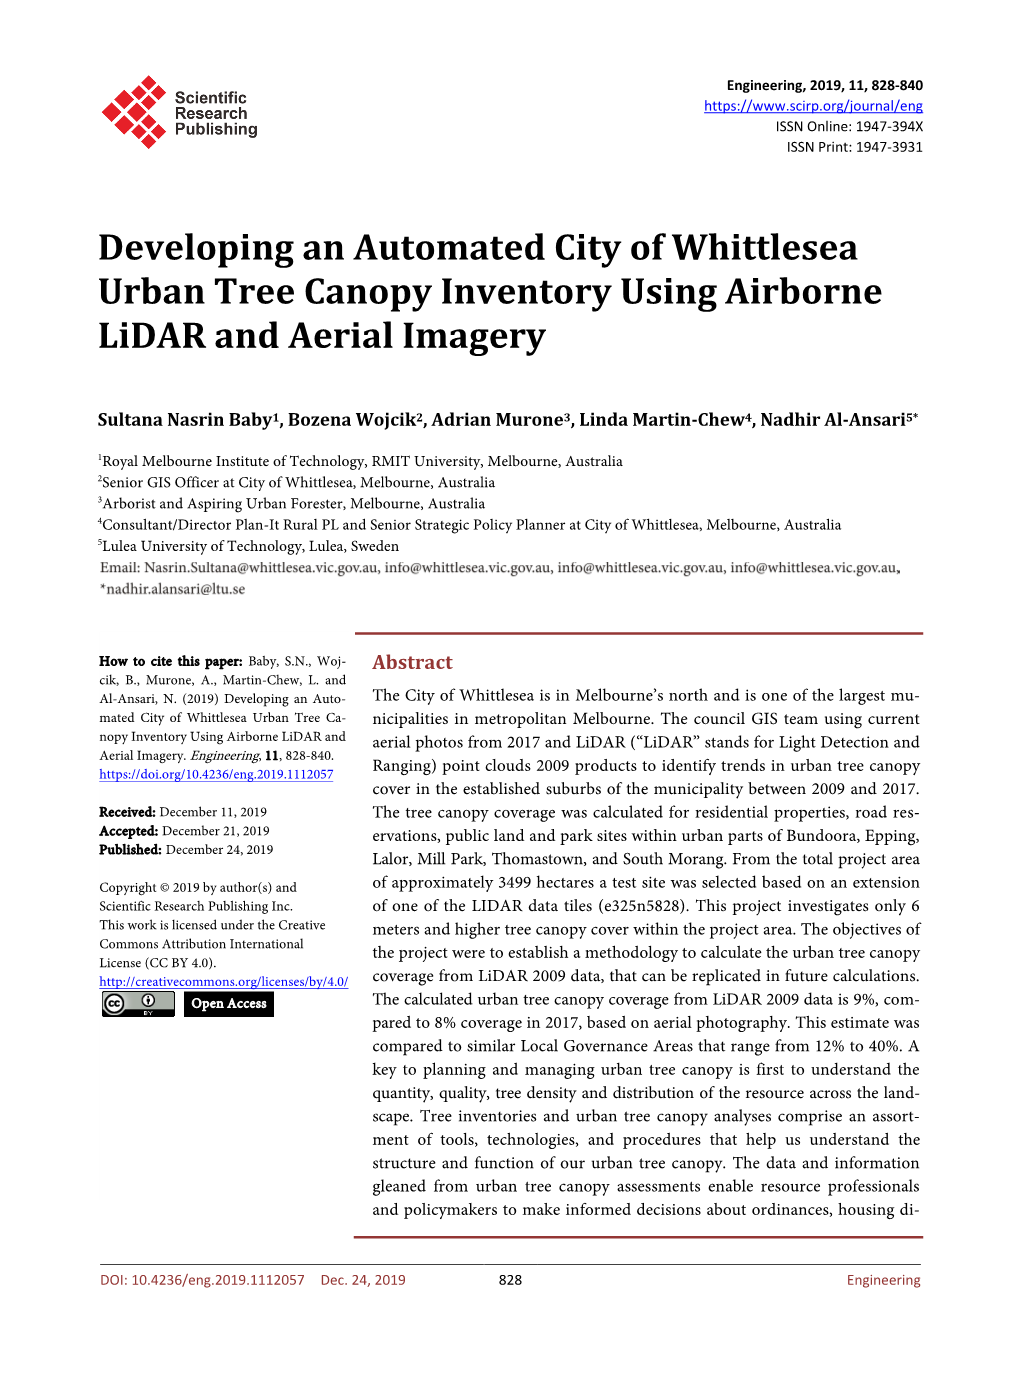 Developing an Automated City of Whittlesea Urban Tree Canopy Inventory Using Airborne Lidar and Aerial Imagery